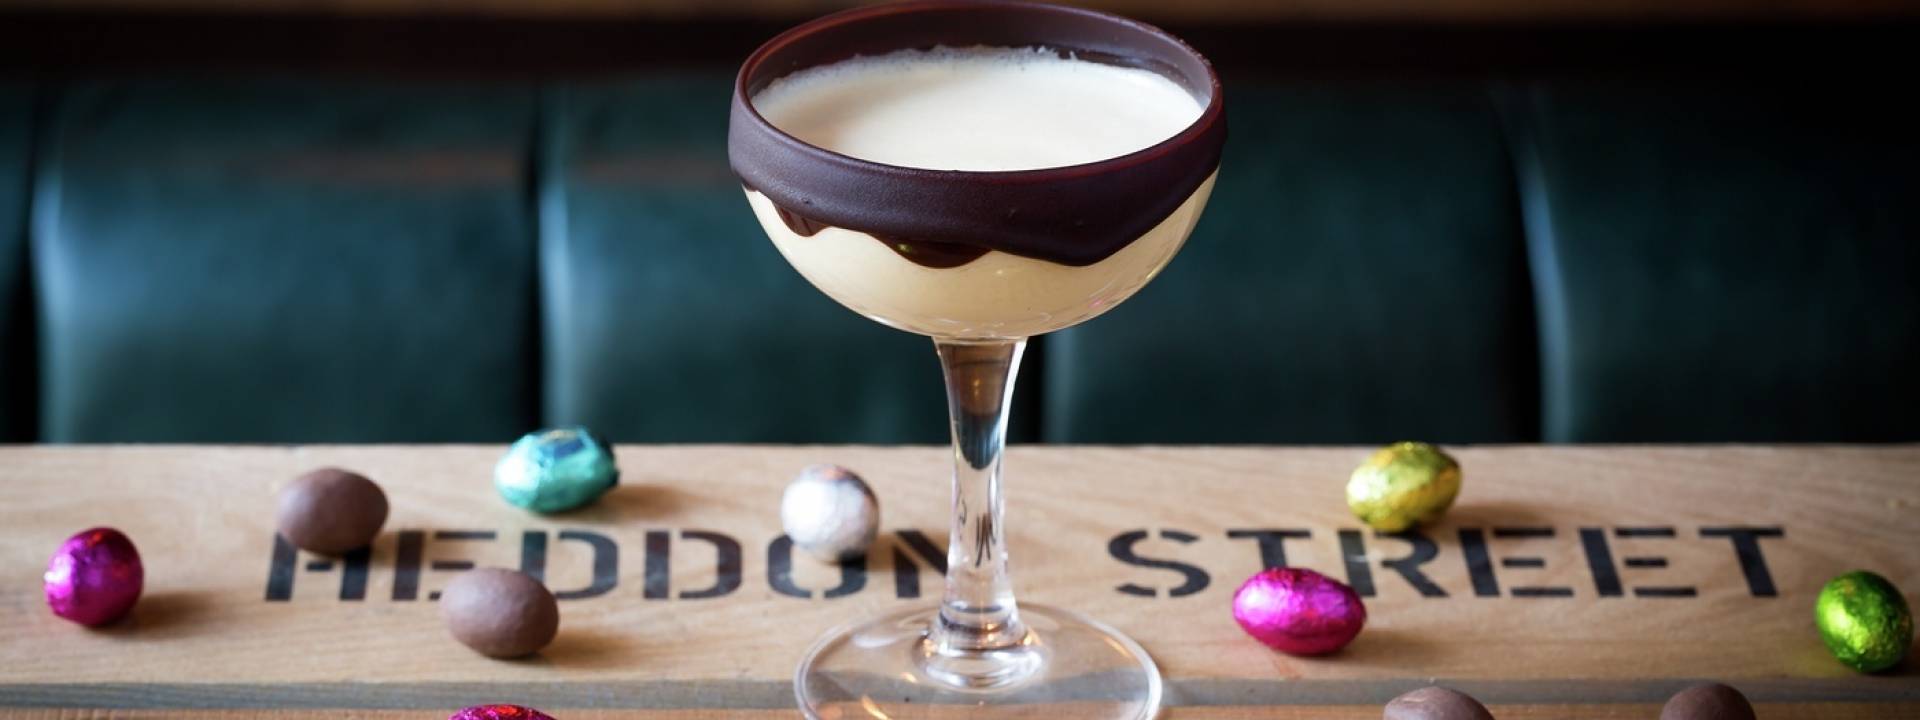 honey bunny easter cocktail recipe